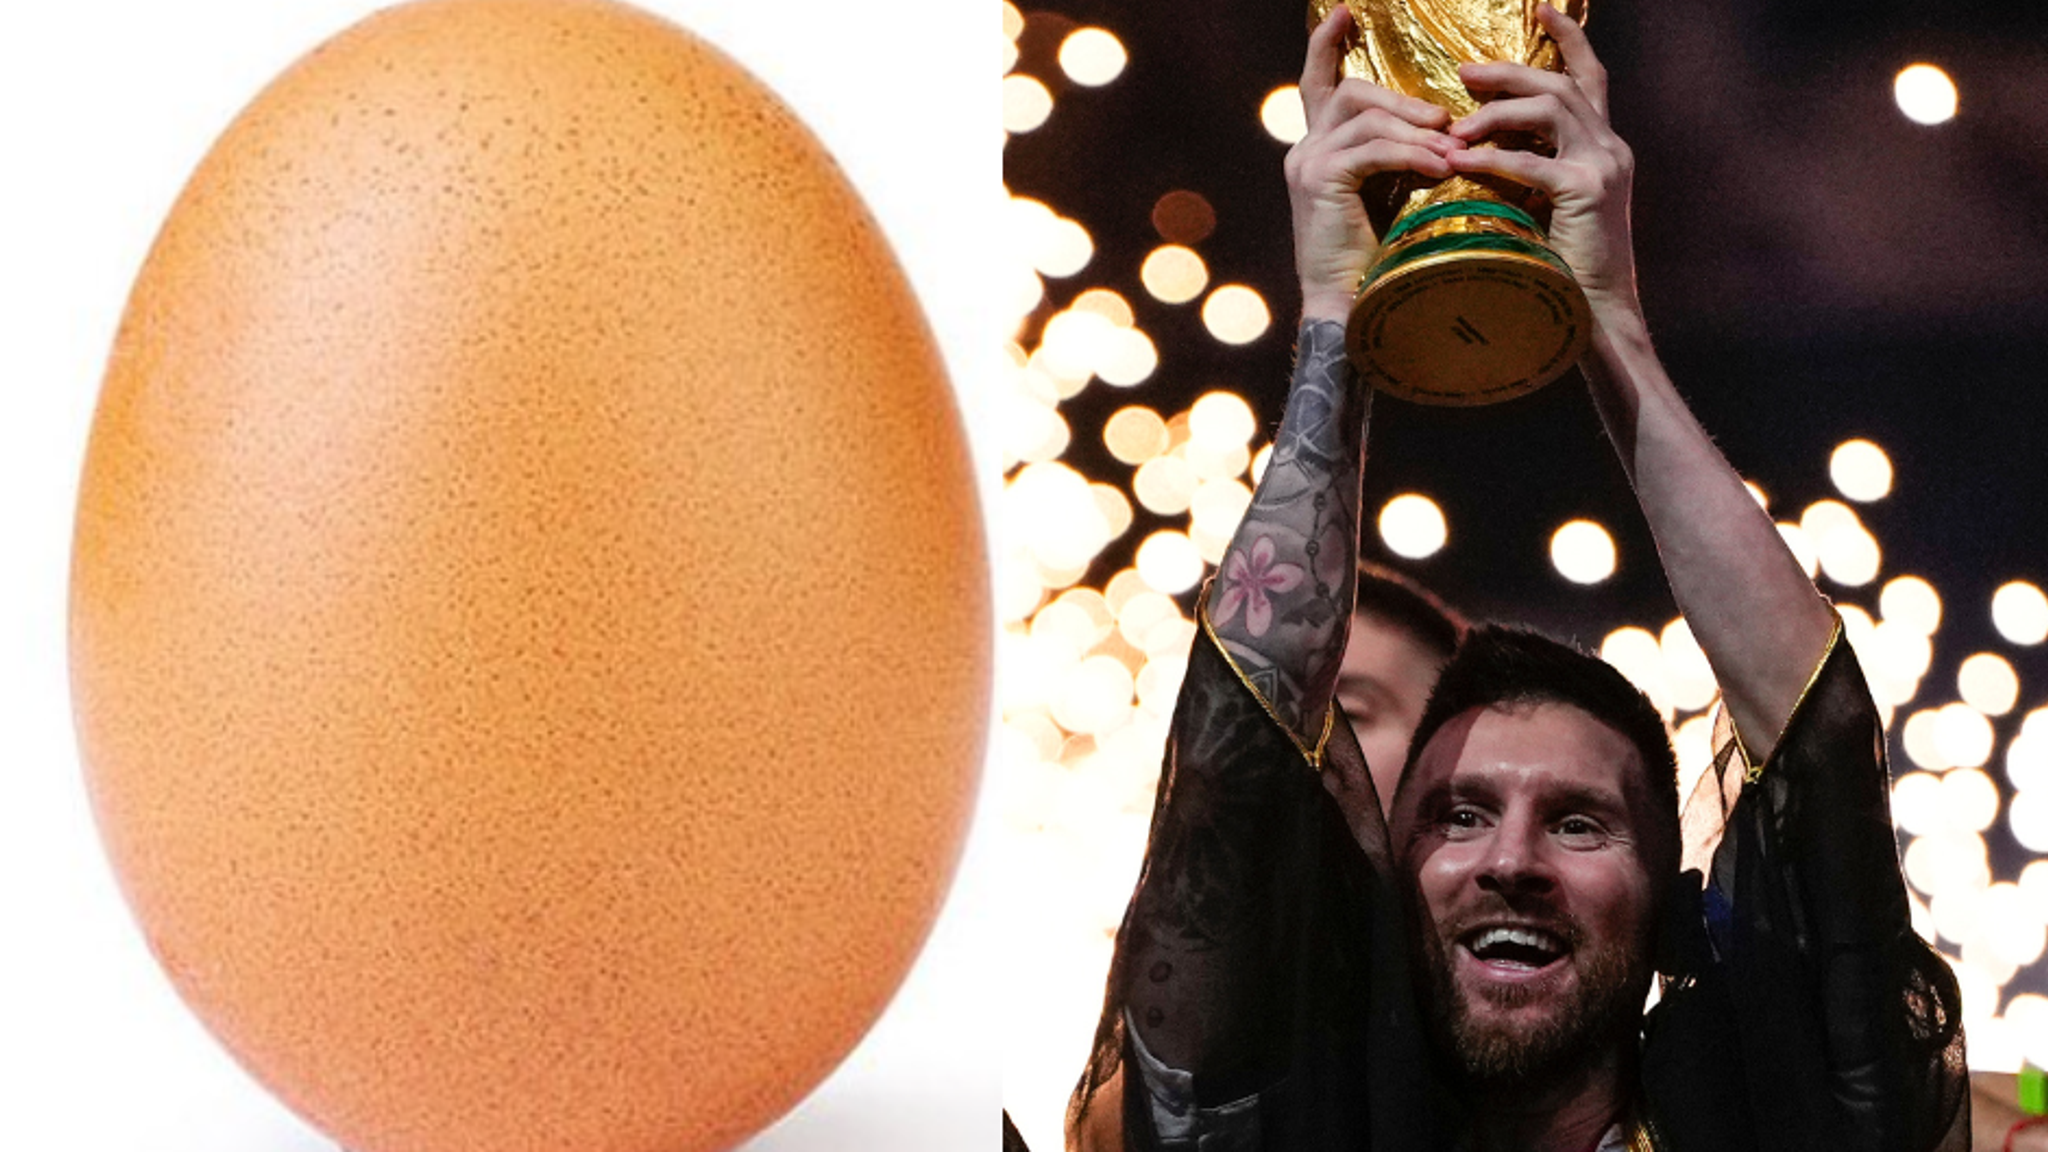 Most liked Instagram posts ever: Messi takes top spot from egg